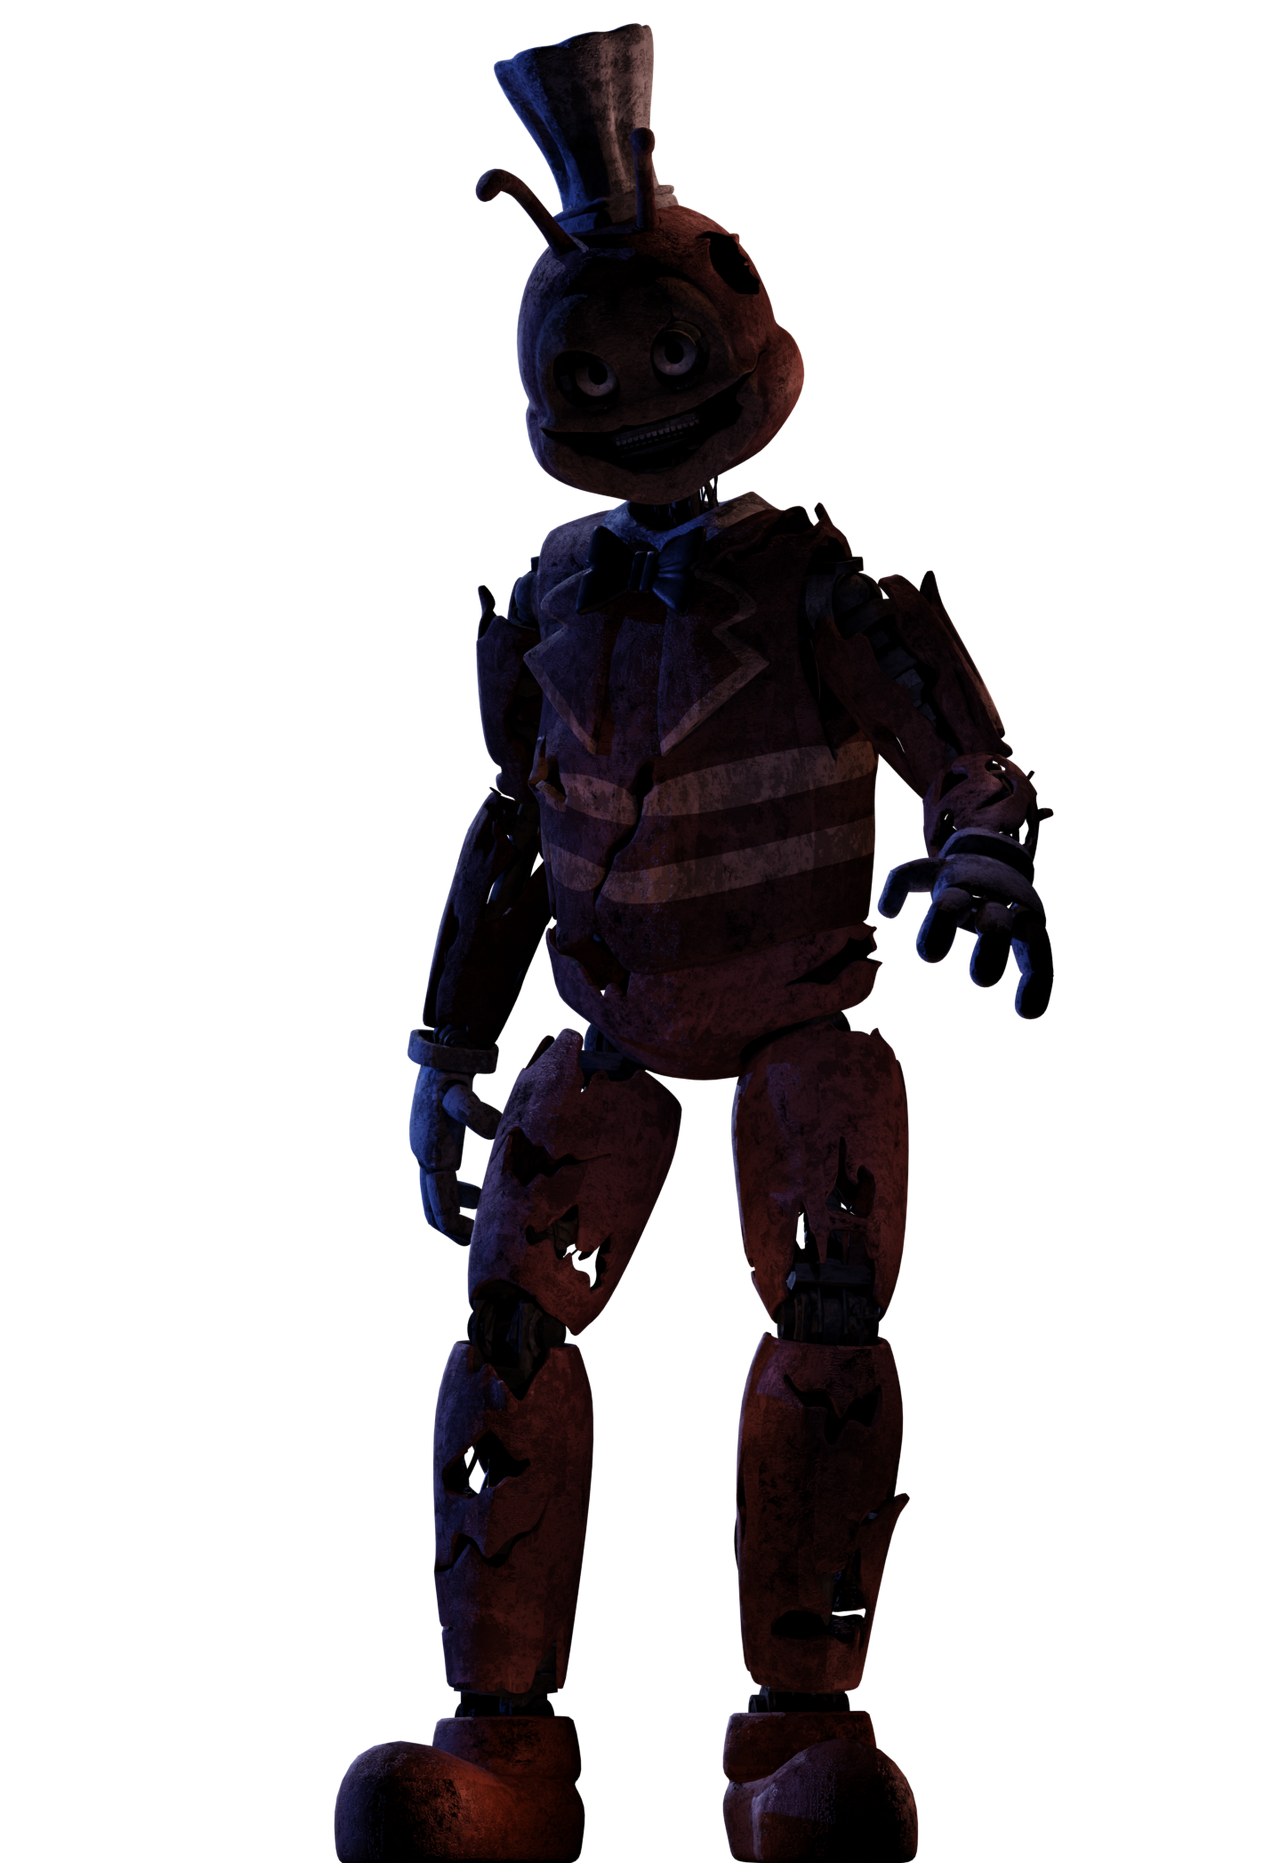 Withered Jolly From Jolly 3 By Thebearproductions On Deviantart